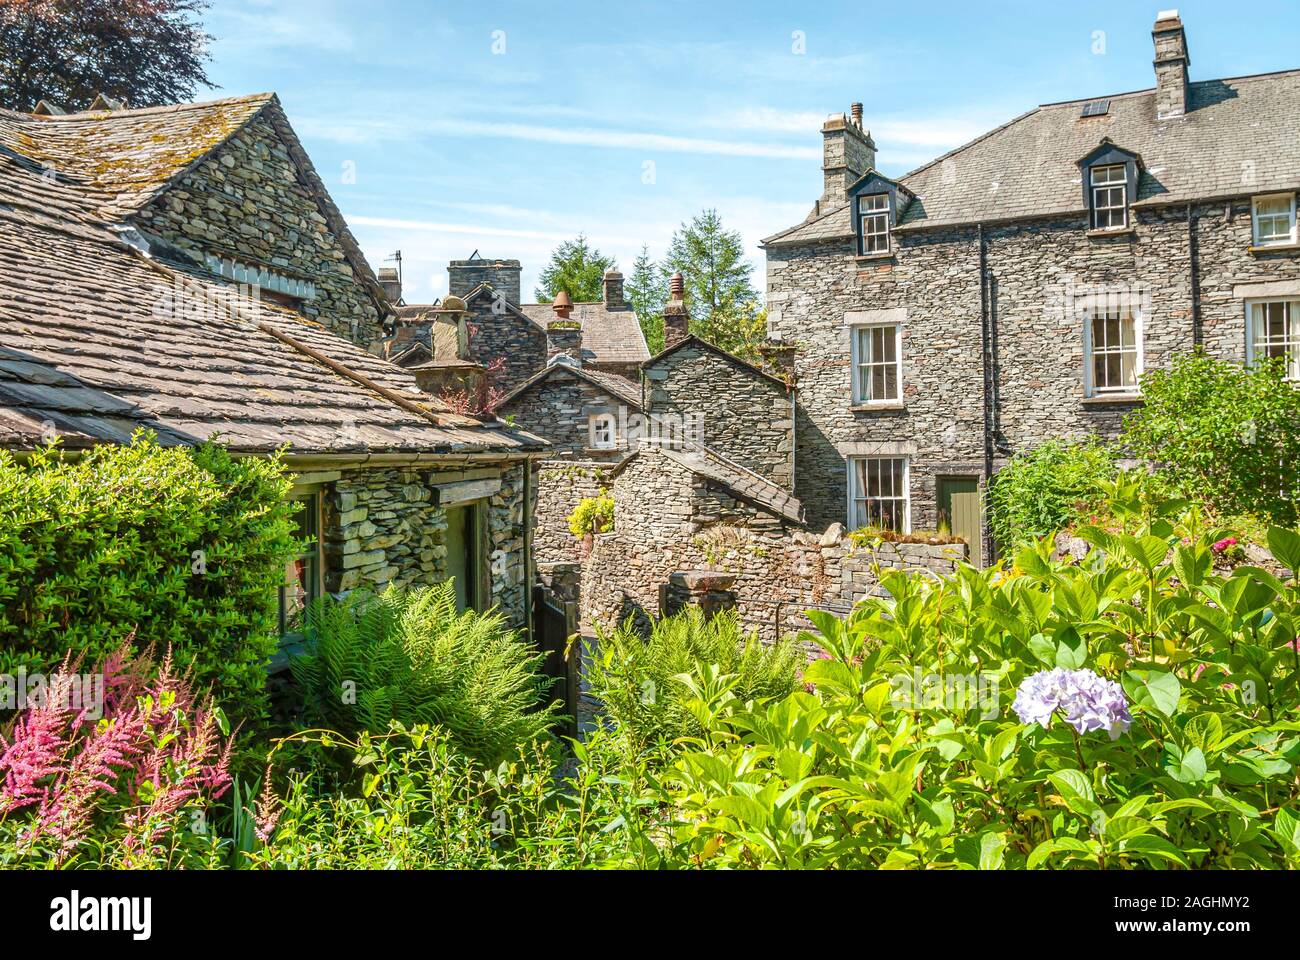 Garden in front of a house in Grasmere village, Lake District, England, UK Stock Photo